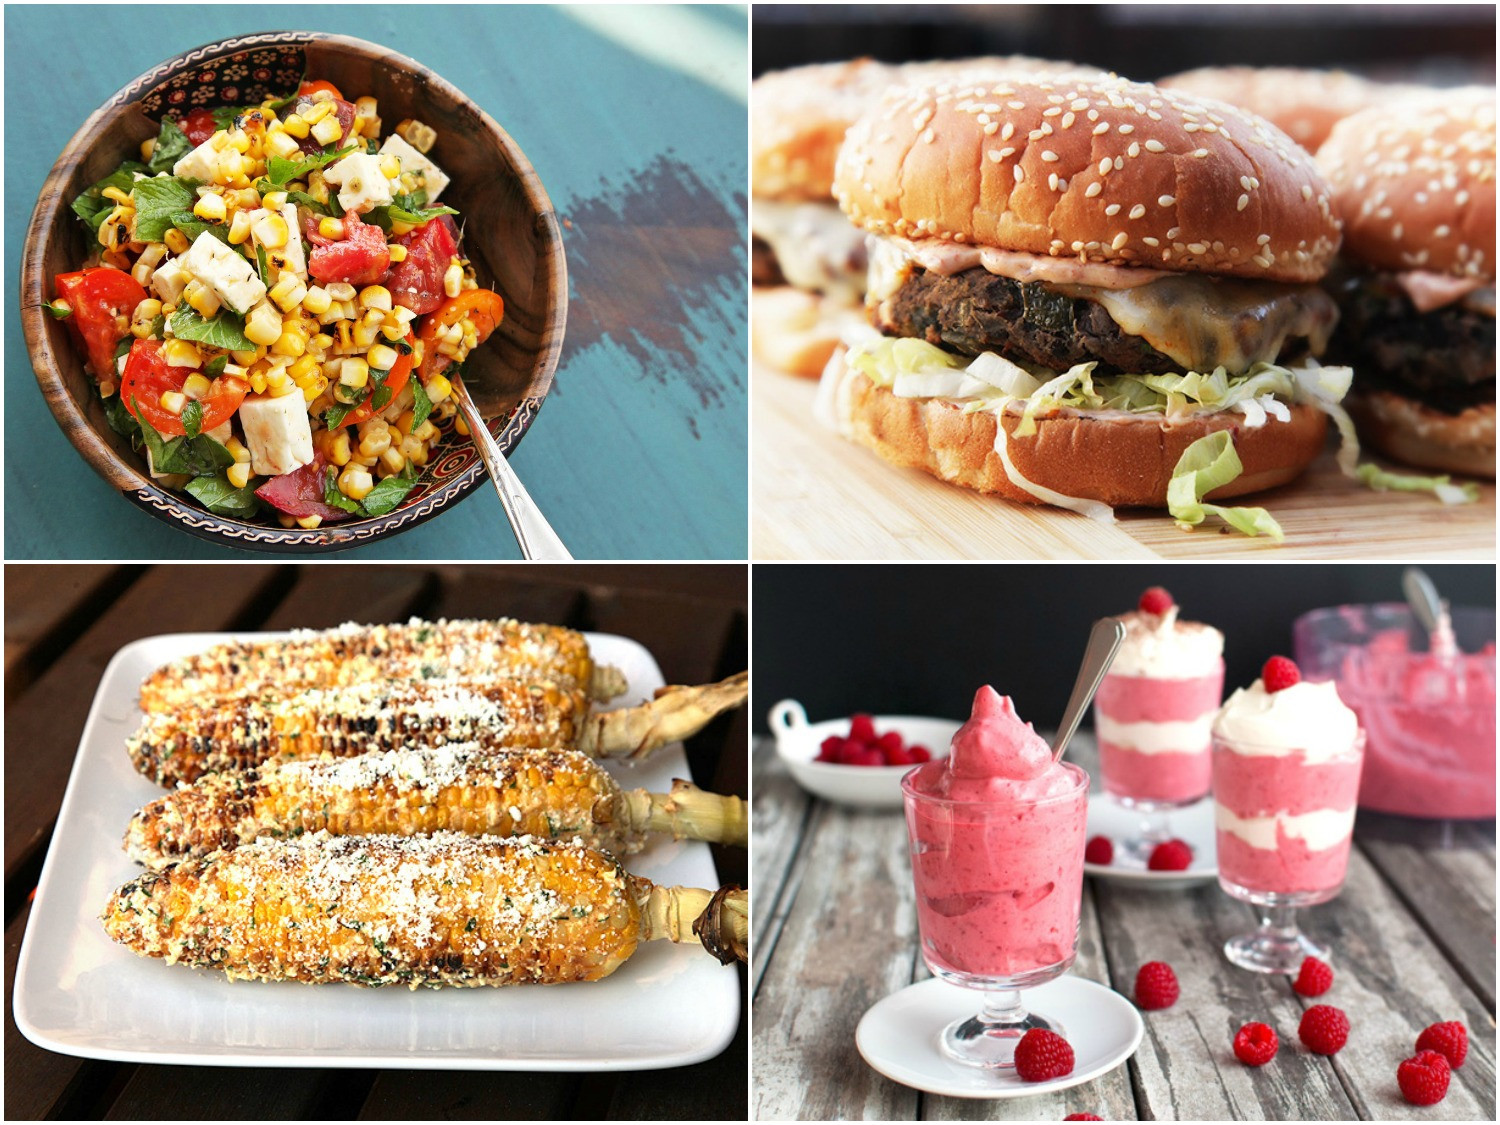 Vegetarian 4Th Of July Recipes
 A Killer Ve arian Fourth of July Menu Even an Omnivore